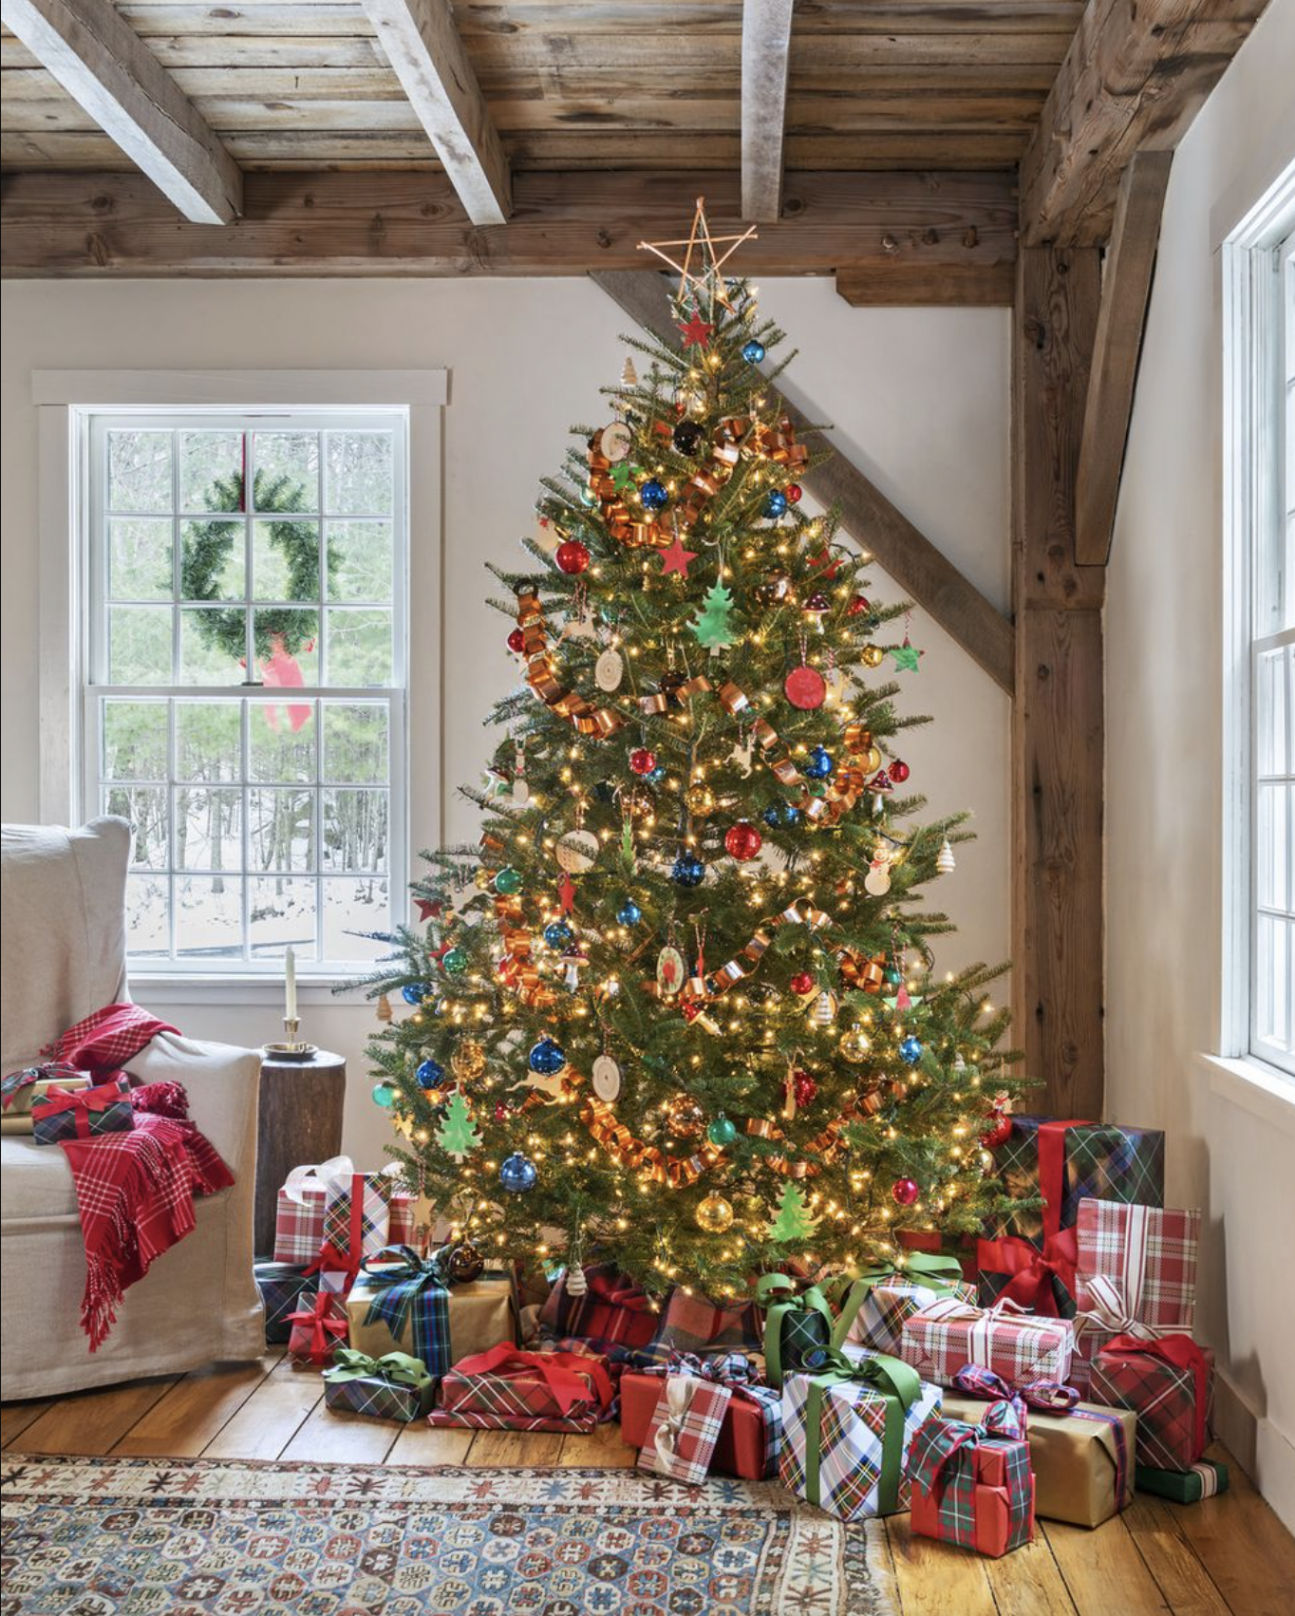 Rustic Christmas Trees to Decorate Your Farmhouse in